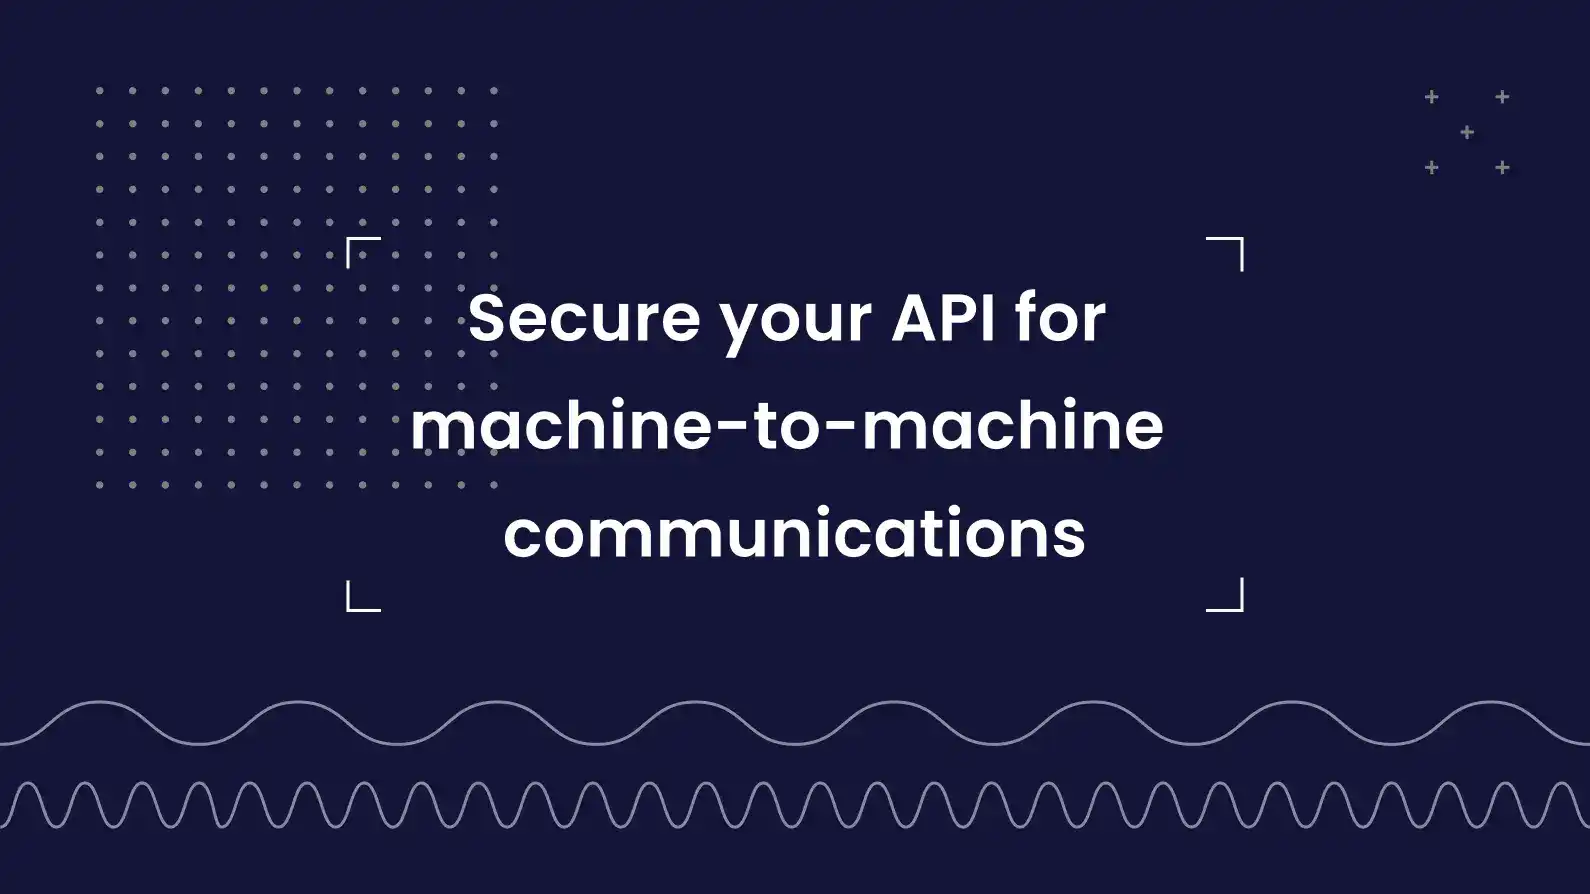 Secure your API resources for machine-to-machine communication